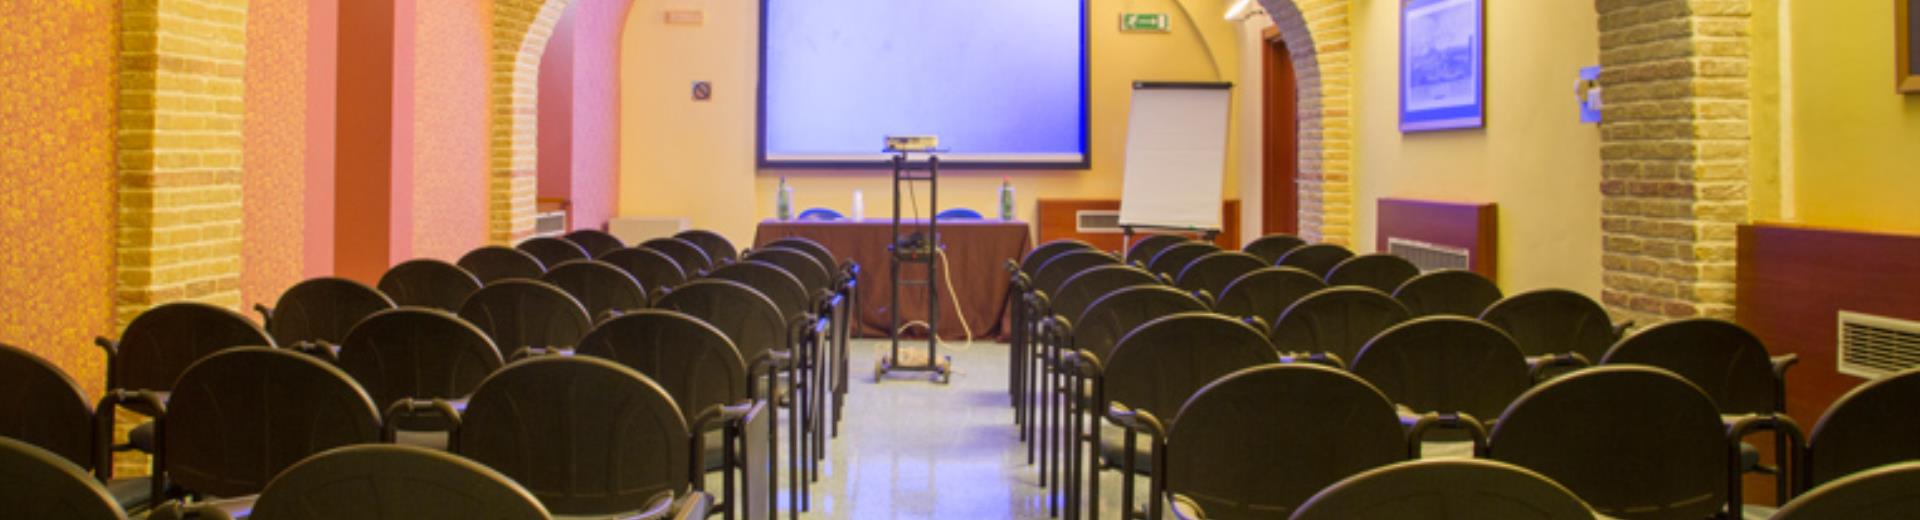 Prince room with maximum capacity up to 70 seater Auditorium, video projector, flipchart.